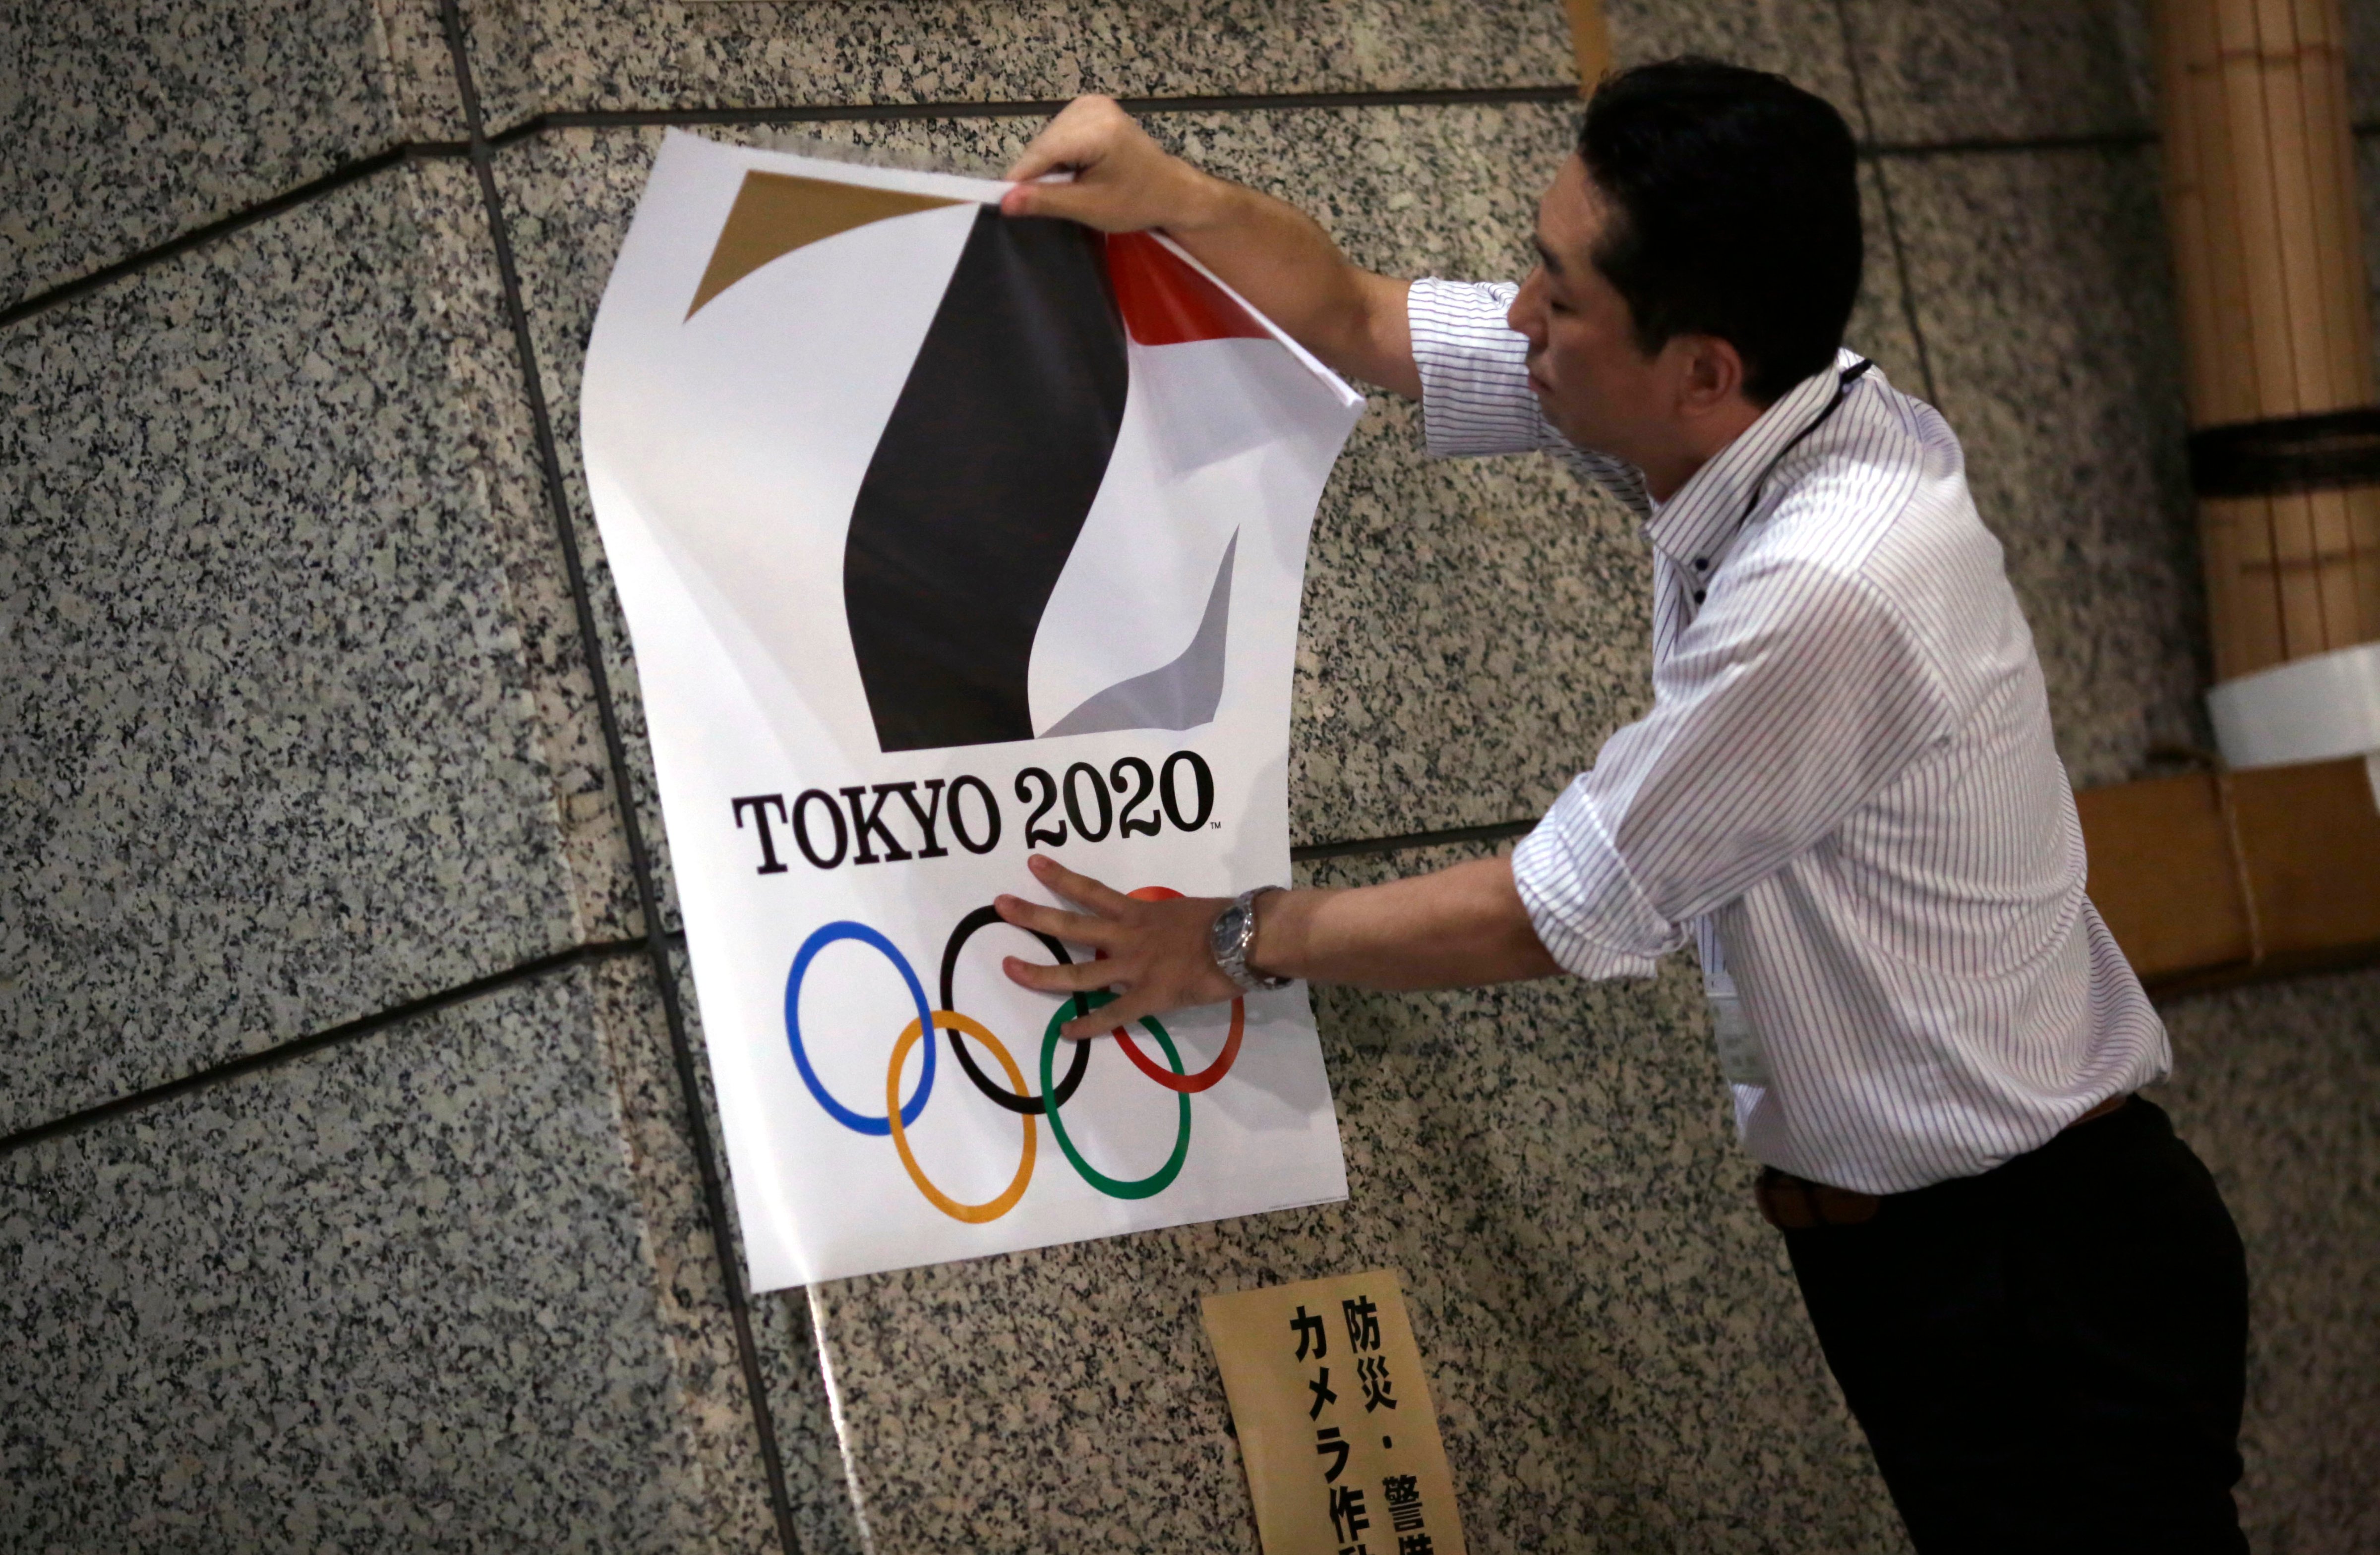 The poster with a logo of Tokyo Olympic Games 2020 is removed from the wall by a worker during an event staged for photographers at the Tokyo Metropolitan Government building in Tokyo Tuesday, Sept. 1, 2015 (Eugene Hoshiko—AP)